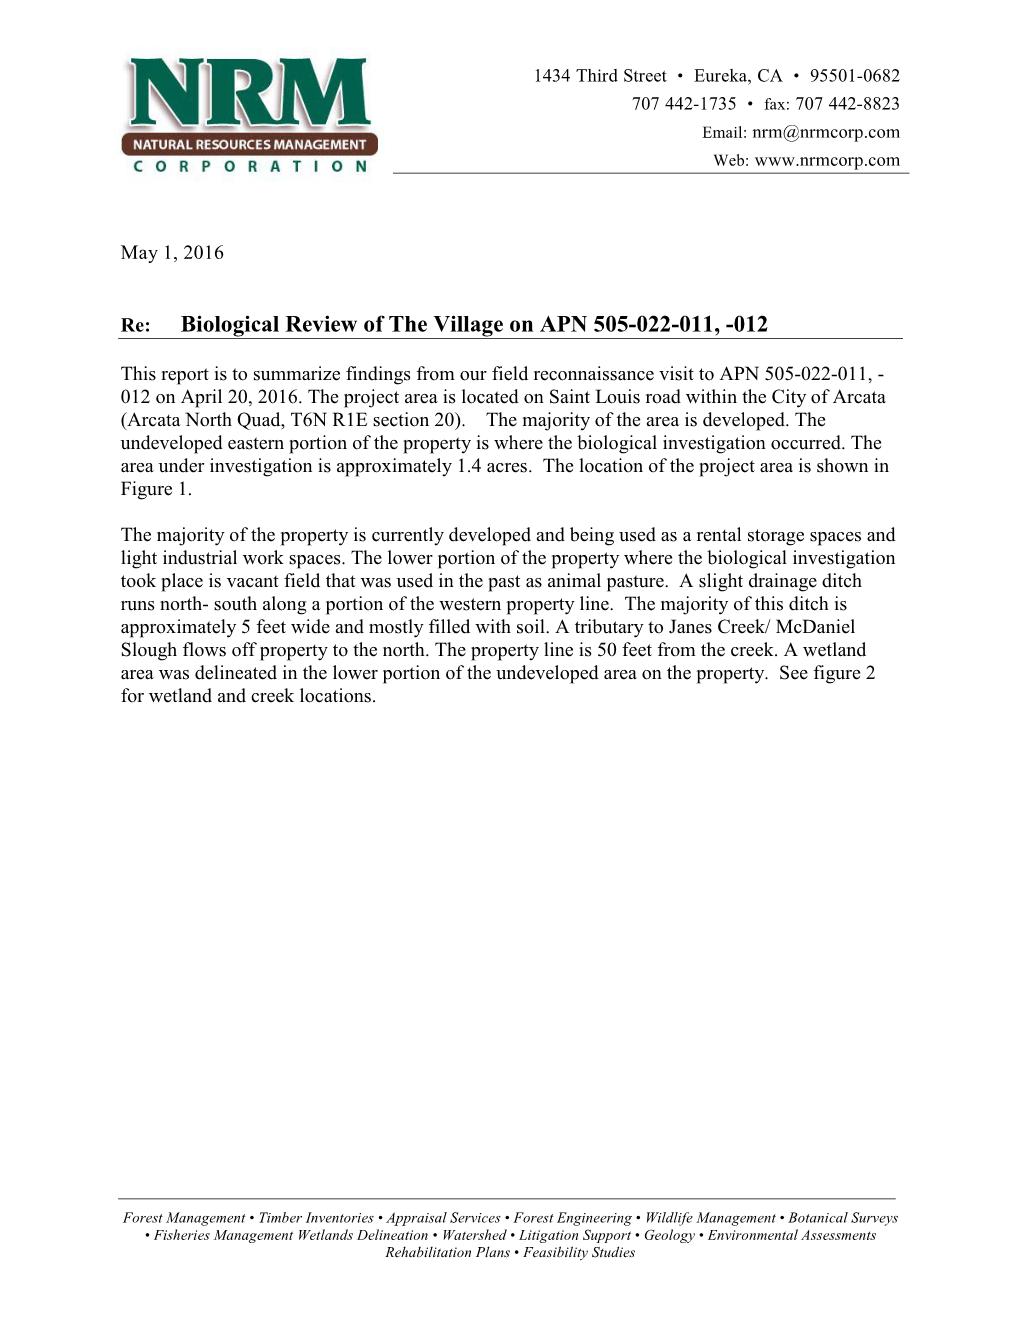 Biological Review of the Village on APN 505-022-011, -012